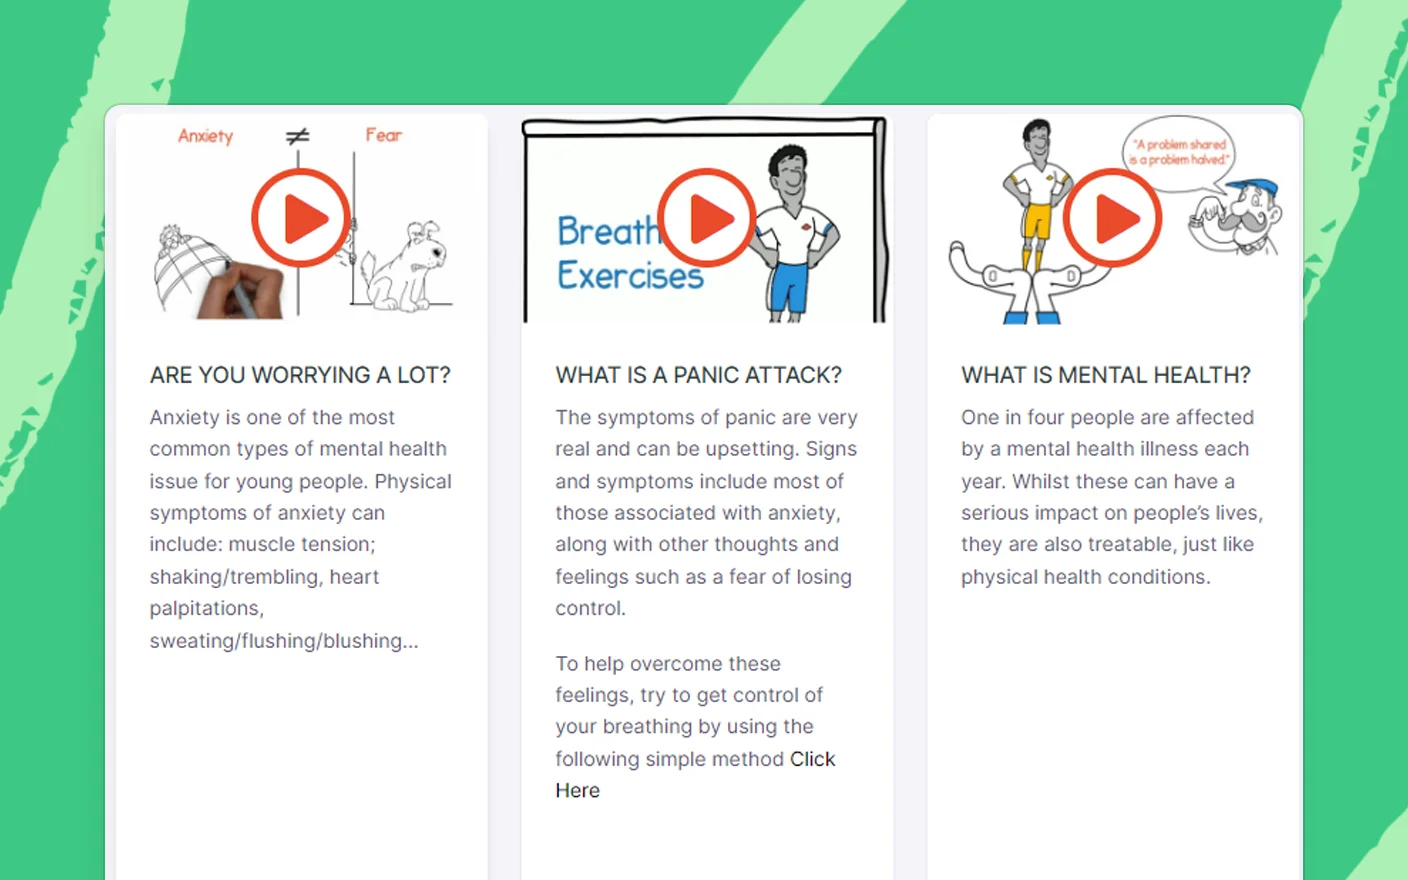 Interactive cards with play buttons on mental health topics such as anxiety, panic attacks, and mental health awareness, designed for athletes.